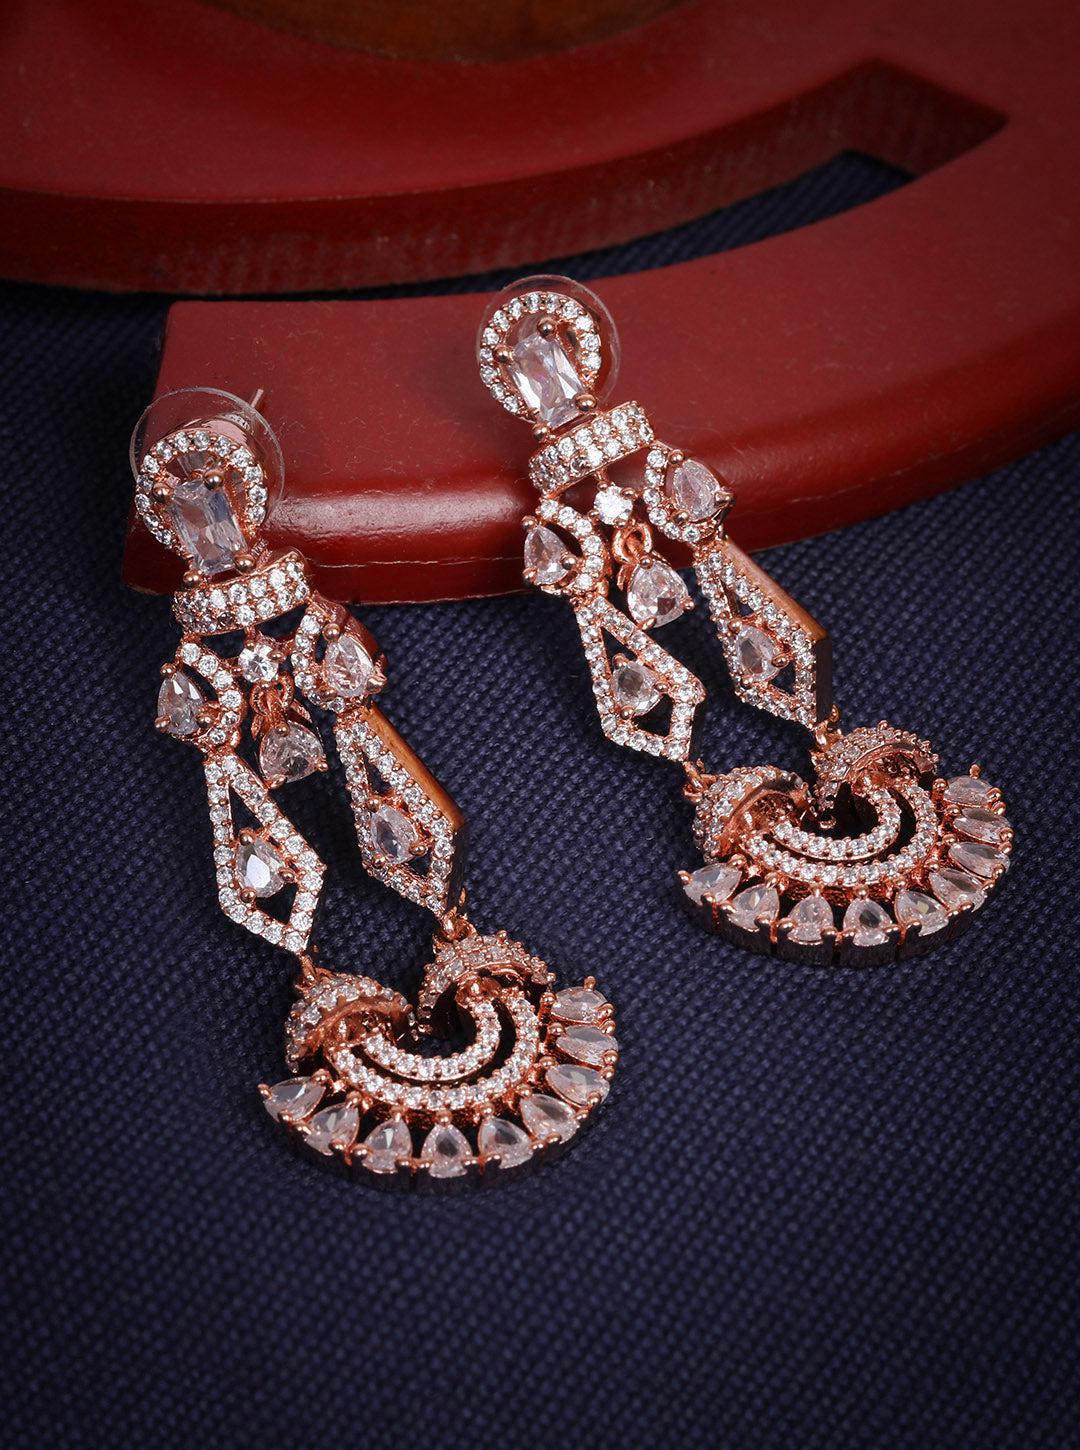 Premium Rose Gold Plated with sparkling White CZ stones Jhumka / Earrings 8953N